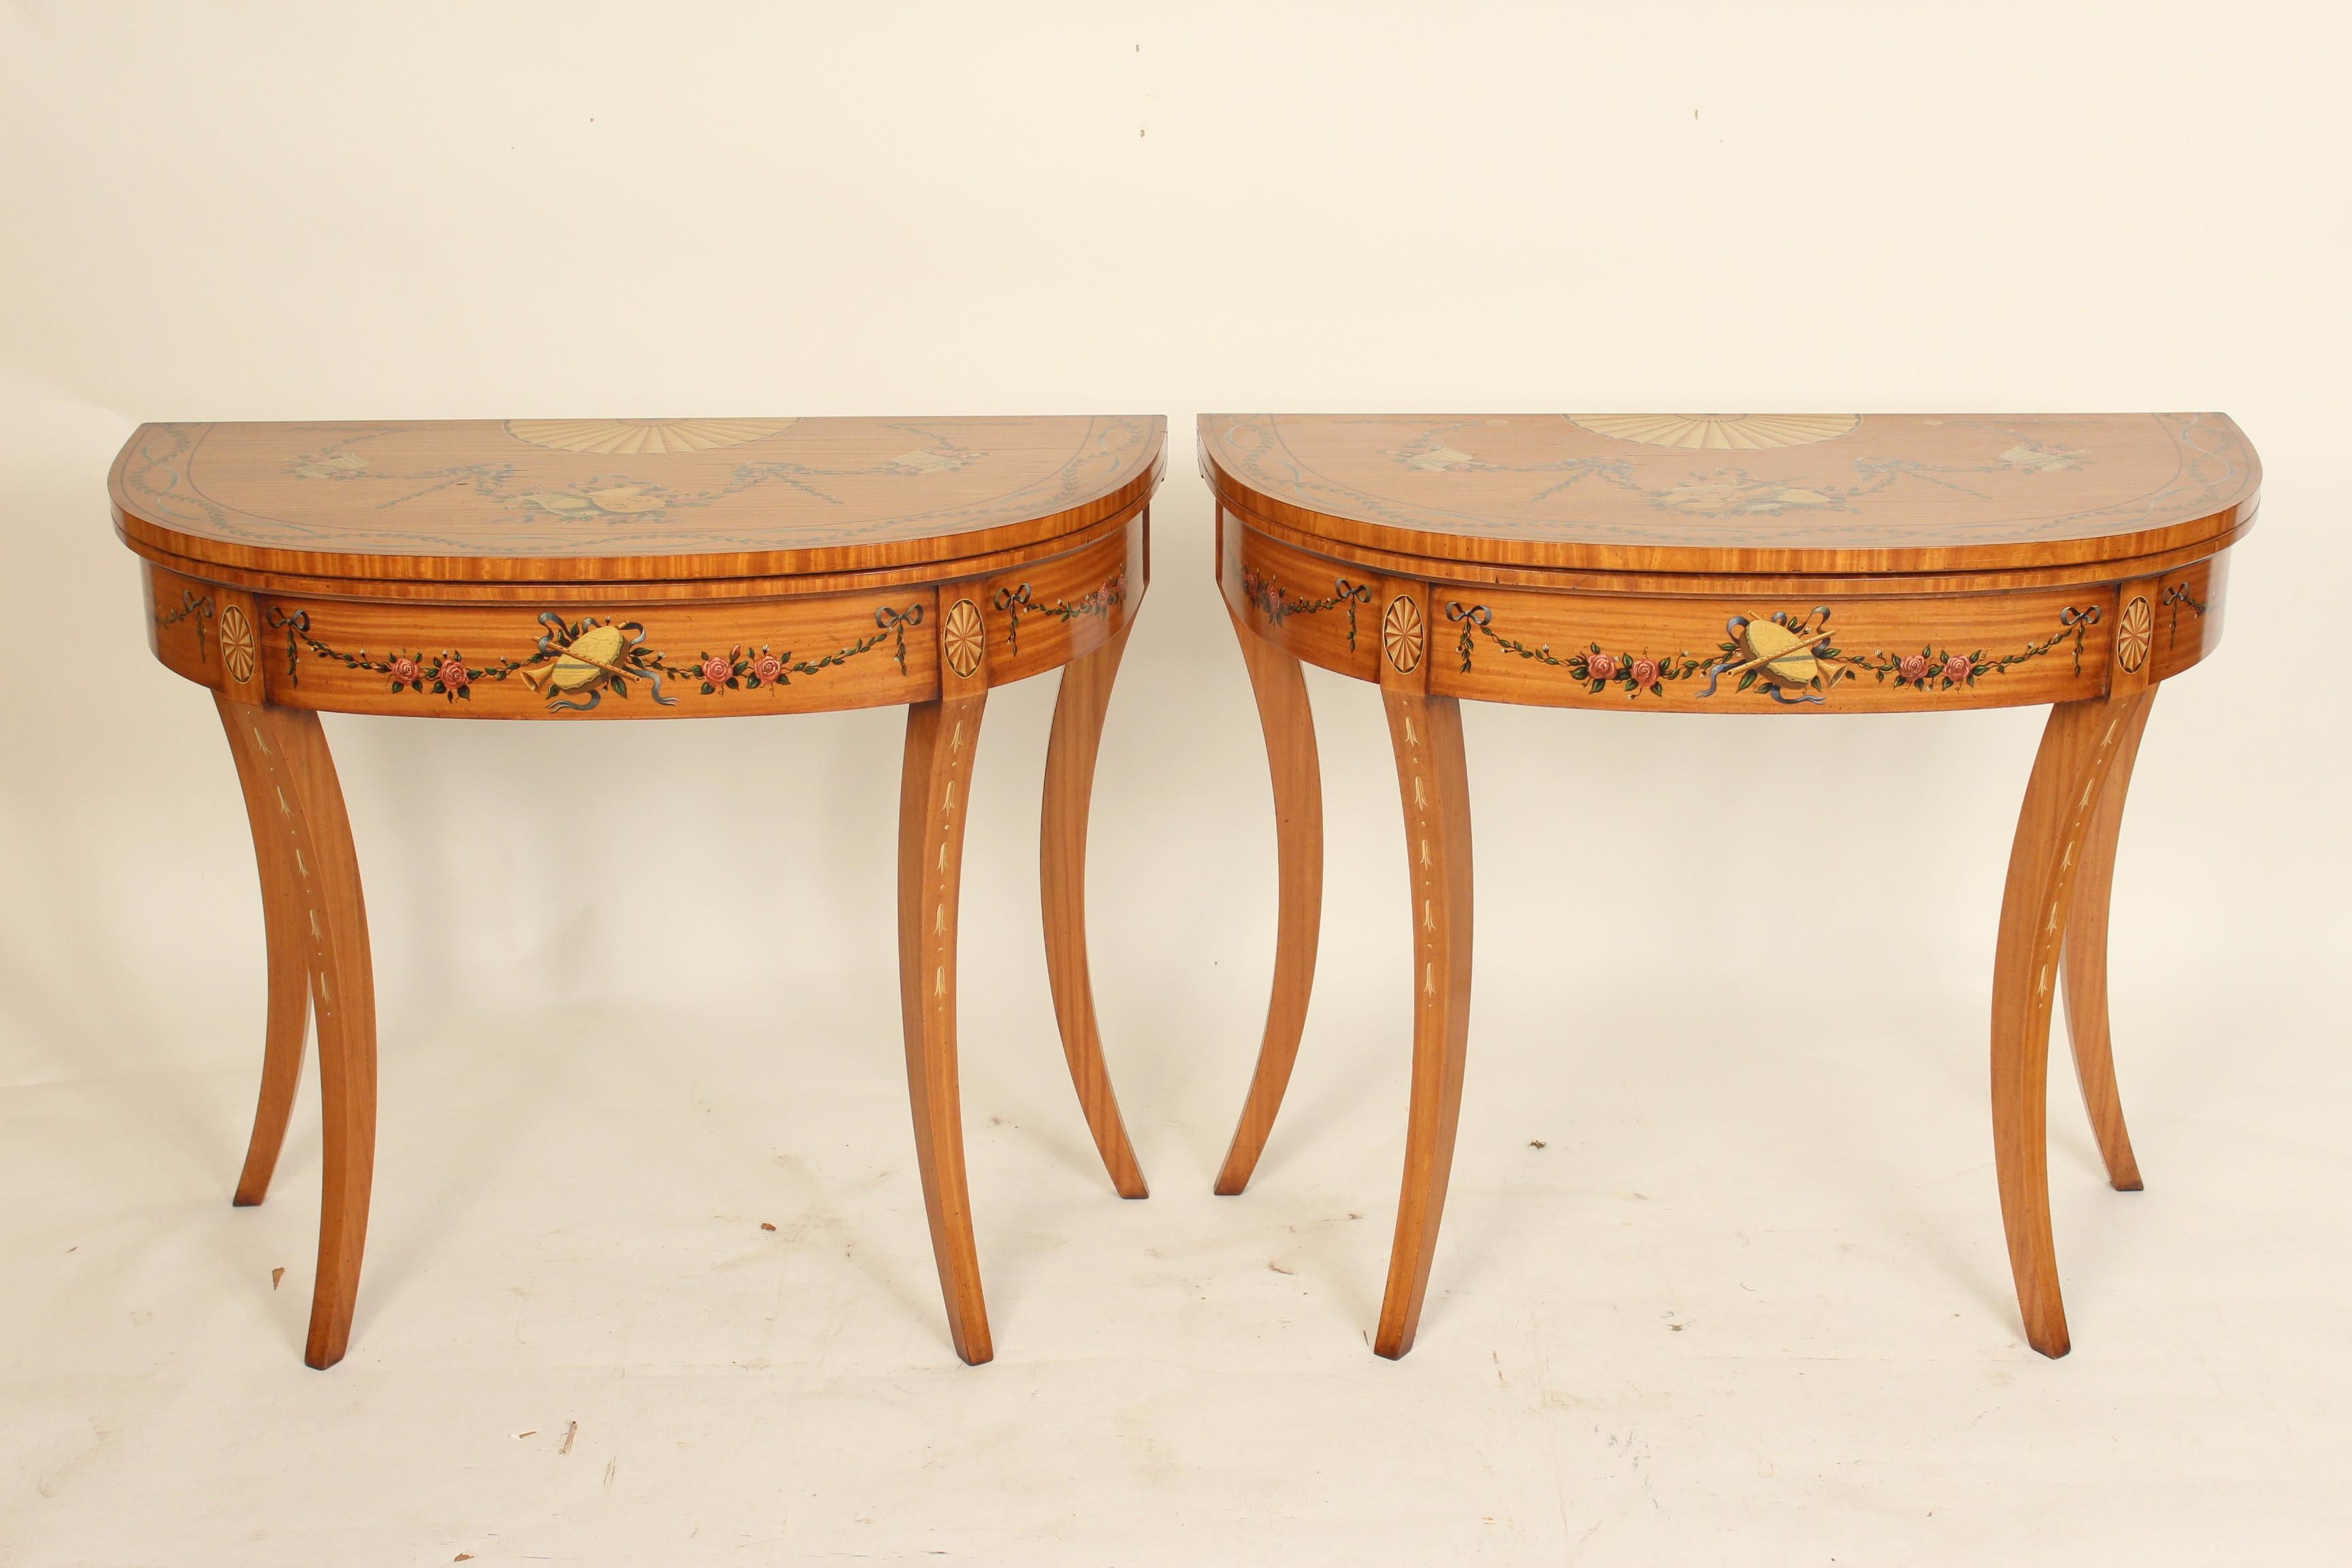 Pair of English Edwardian Style Painted Satinwood Games Tables In Good Condition For Sale In Laguna Beach, CA